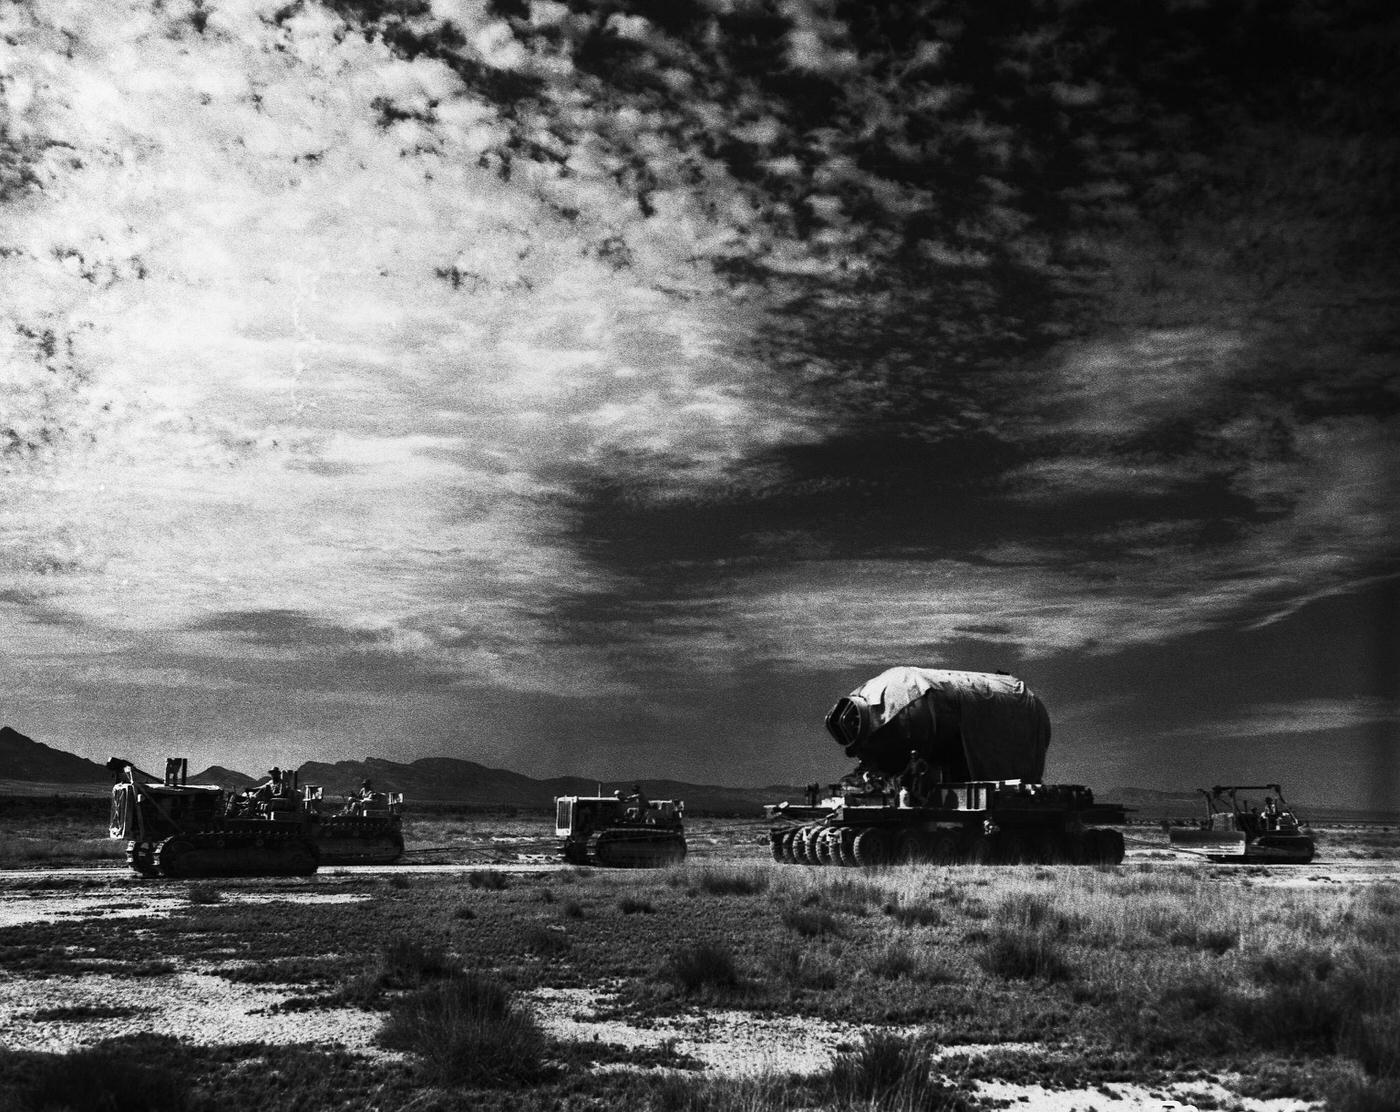 Transporting Container for Nuclear Bomb, Trinity Test site, 1945